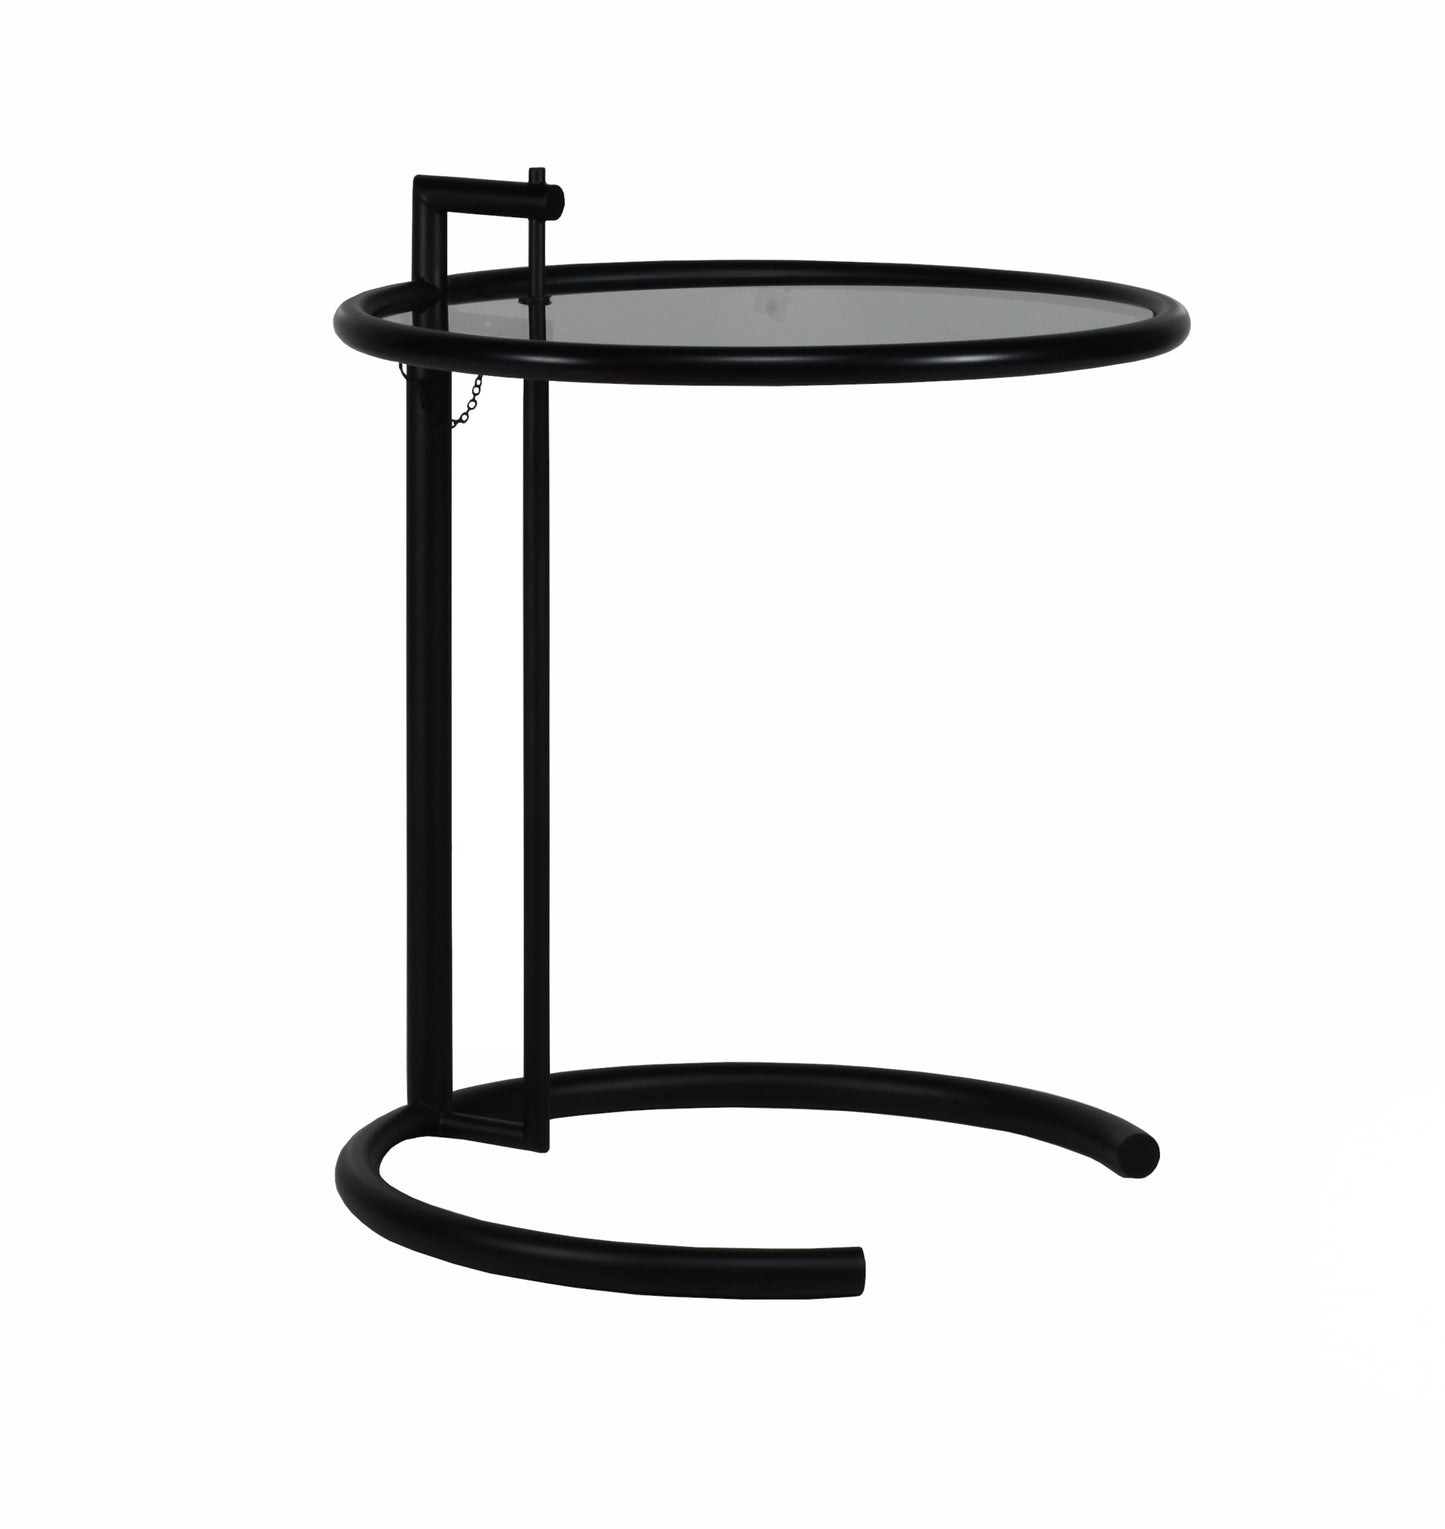 Adjustable table style | Black lacquered Transparent glass | Side